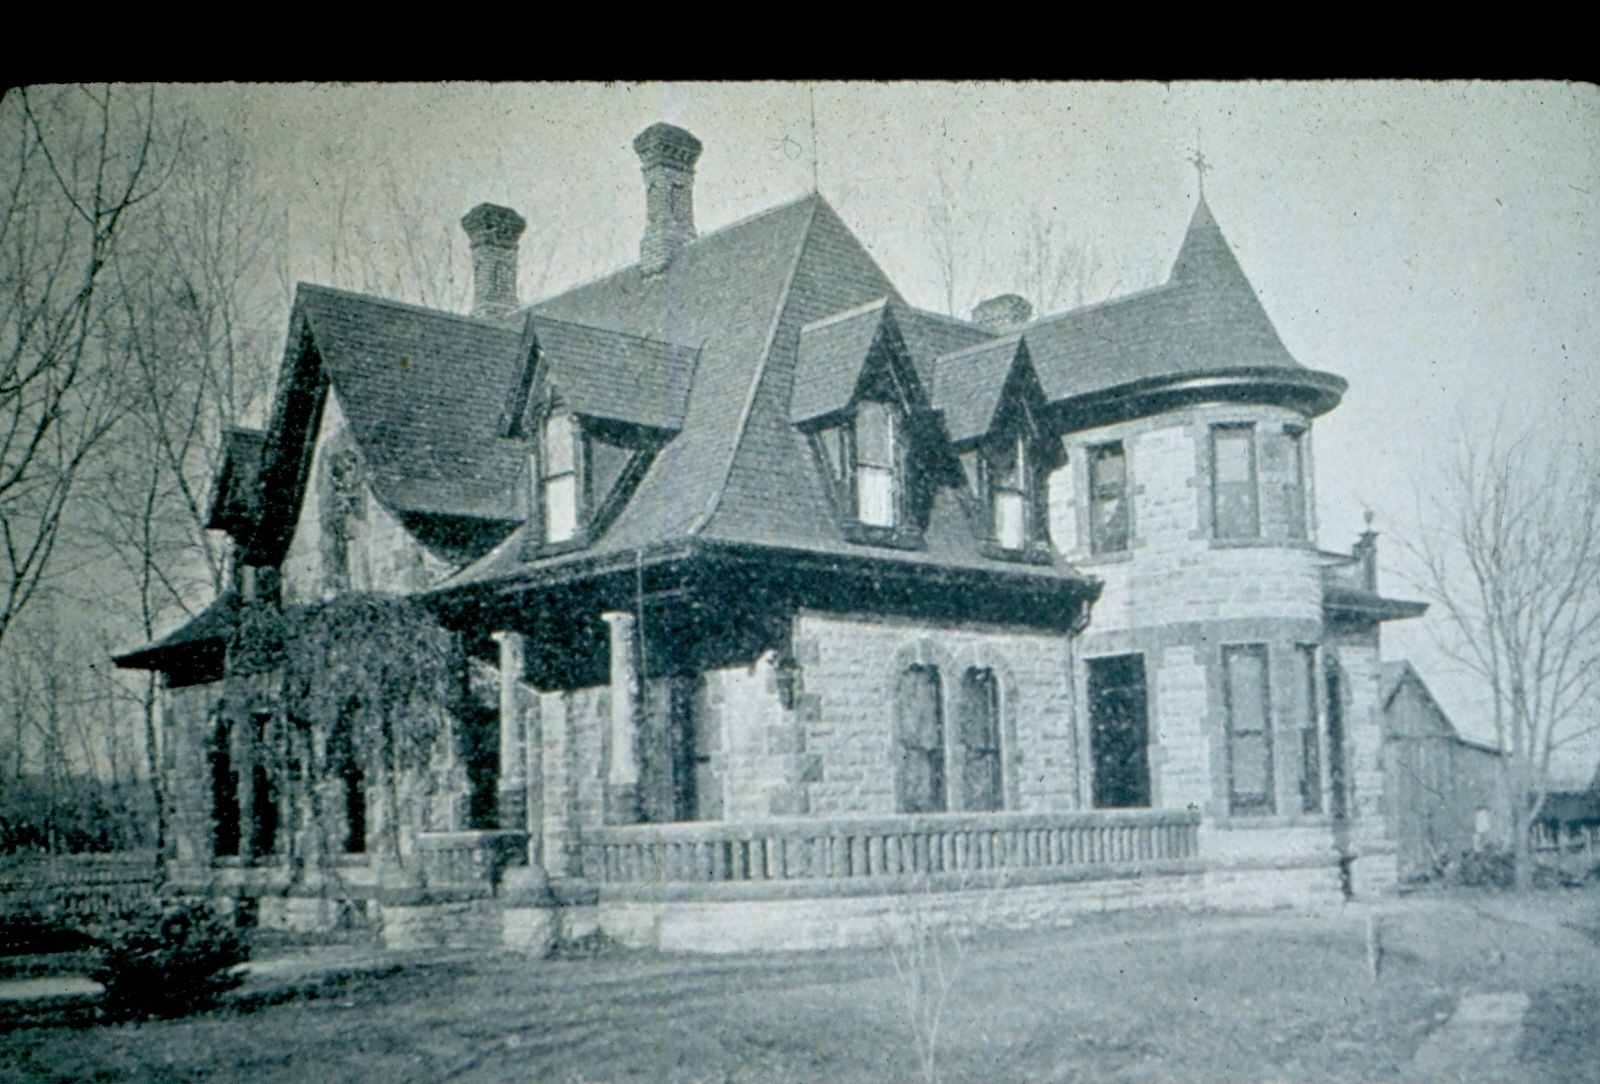 The 1879 Avery House - an early photo